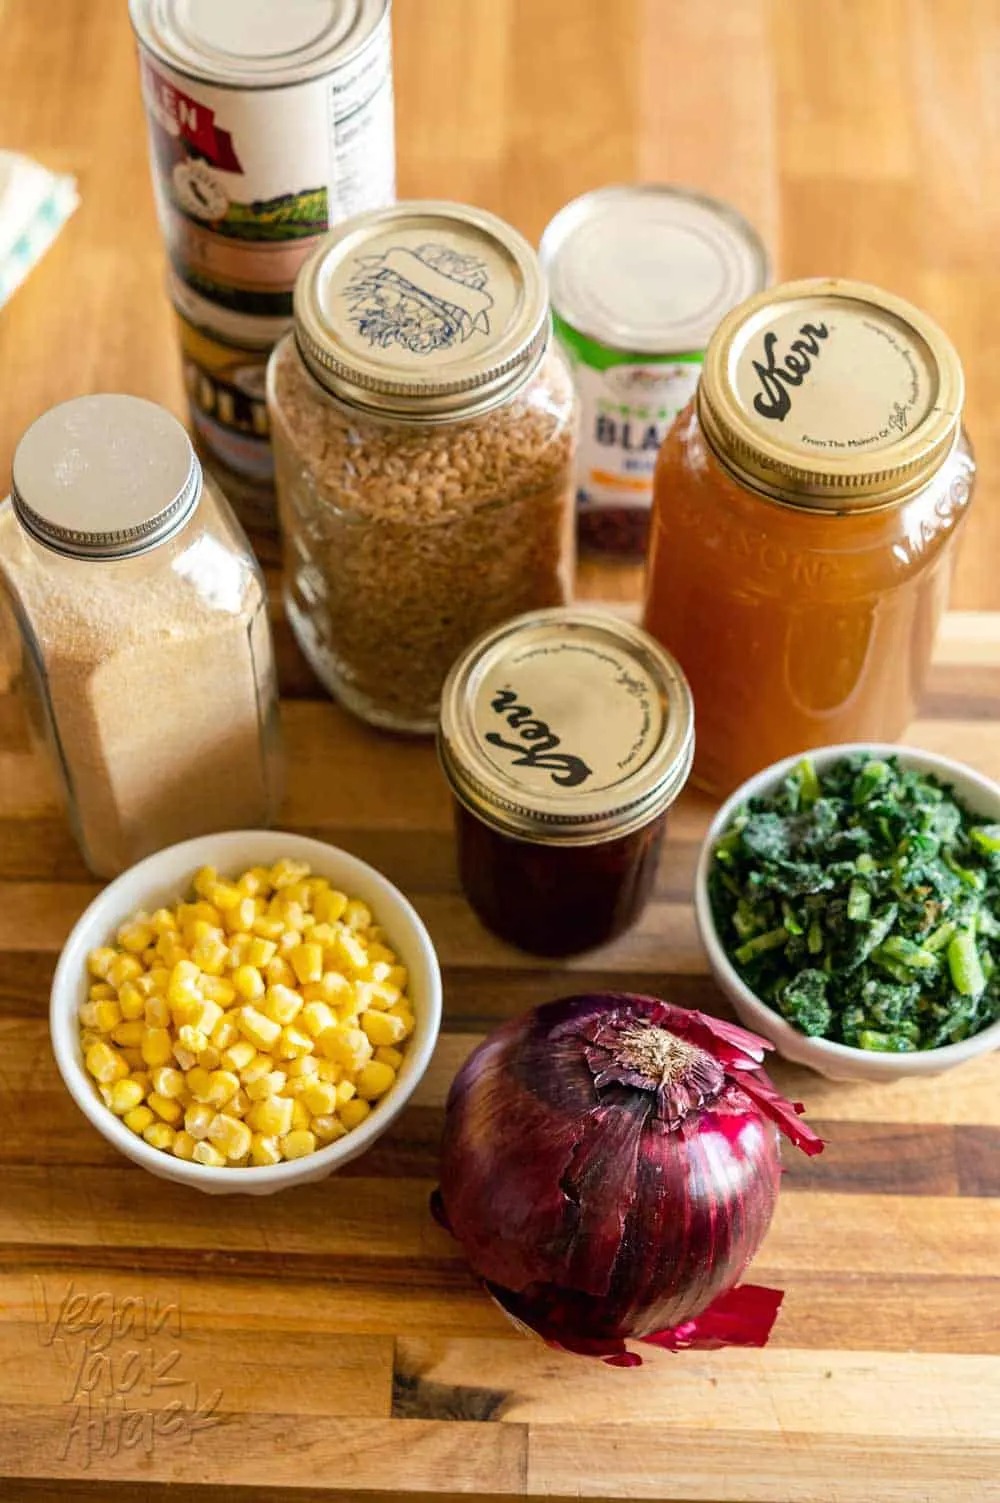 Image of ingredients: red onion, corn, kale, vegetable broth, grains and beans